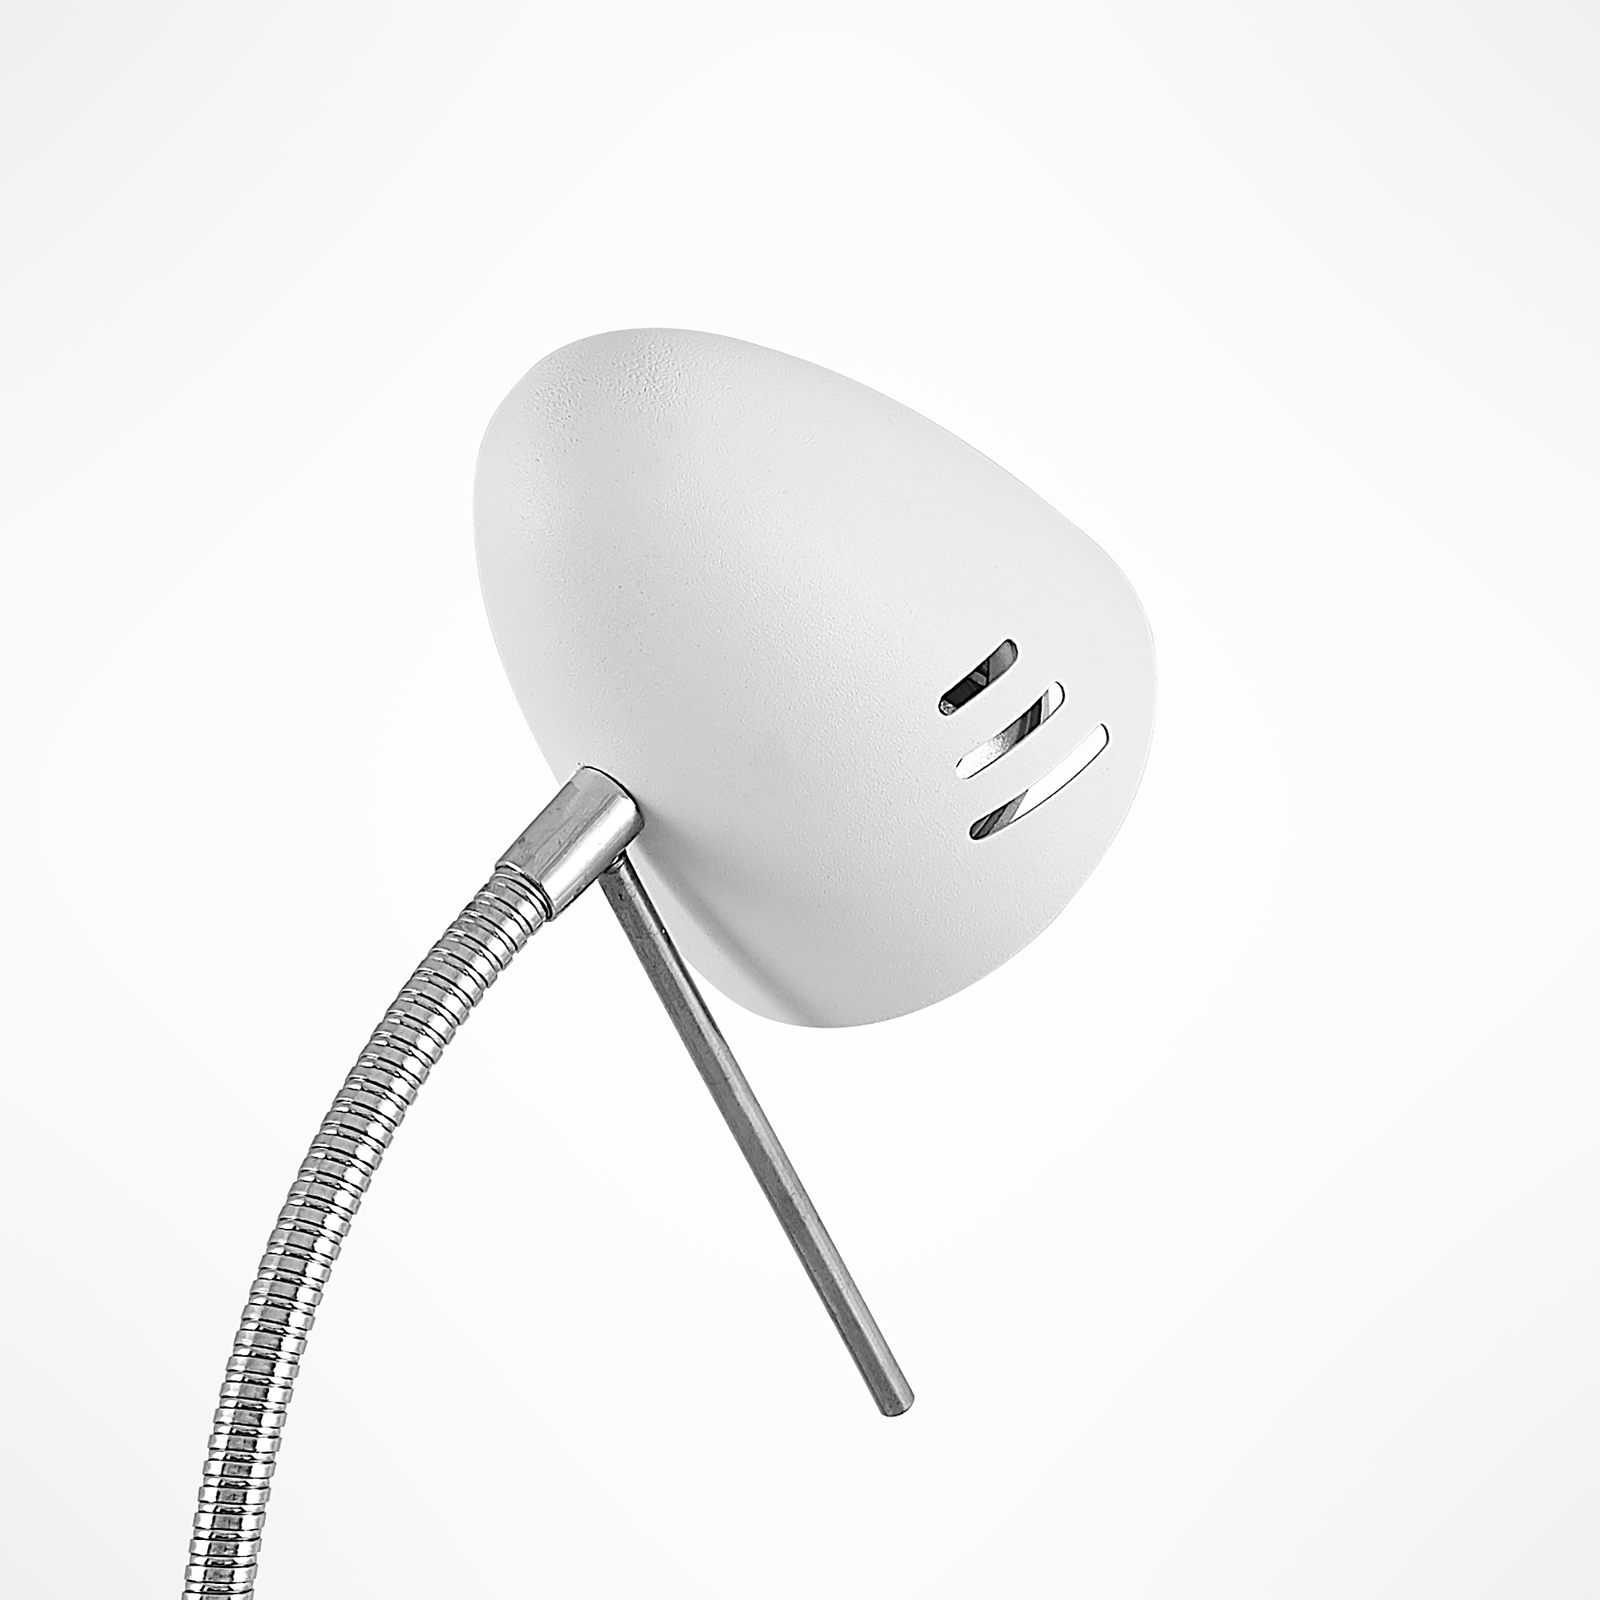 Lindby Heyko lampe à poser, dimmable